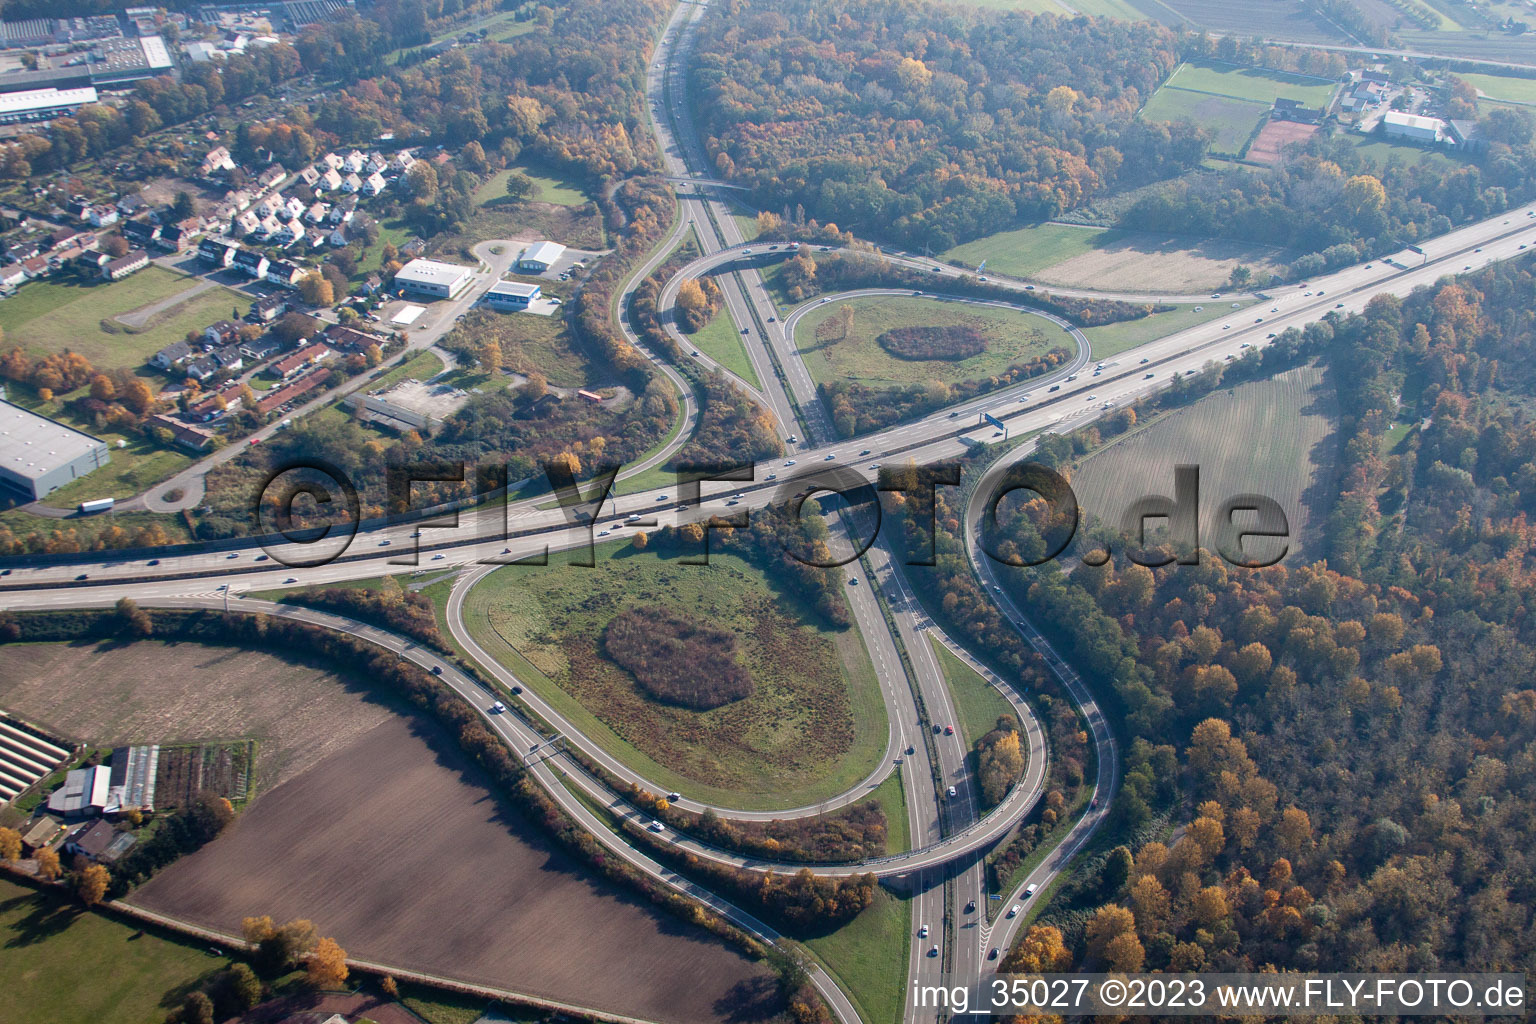 A5 exit Mitte in the district Durlach in Karlsruhe in the state Baden-Wuerttemberg, Germany